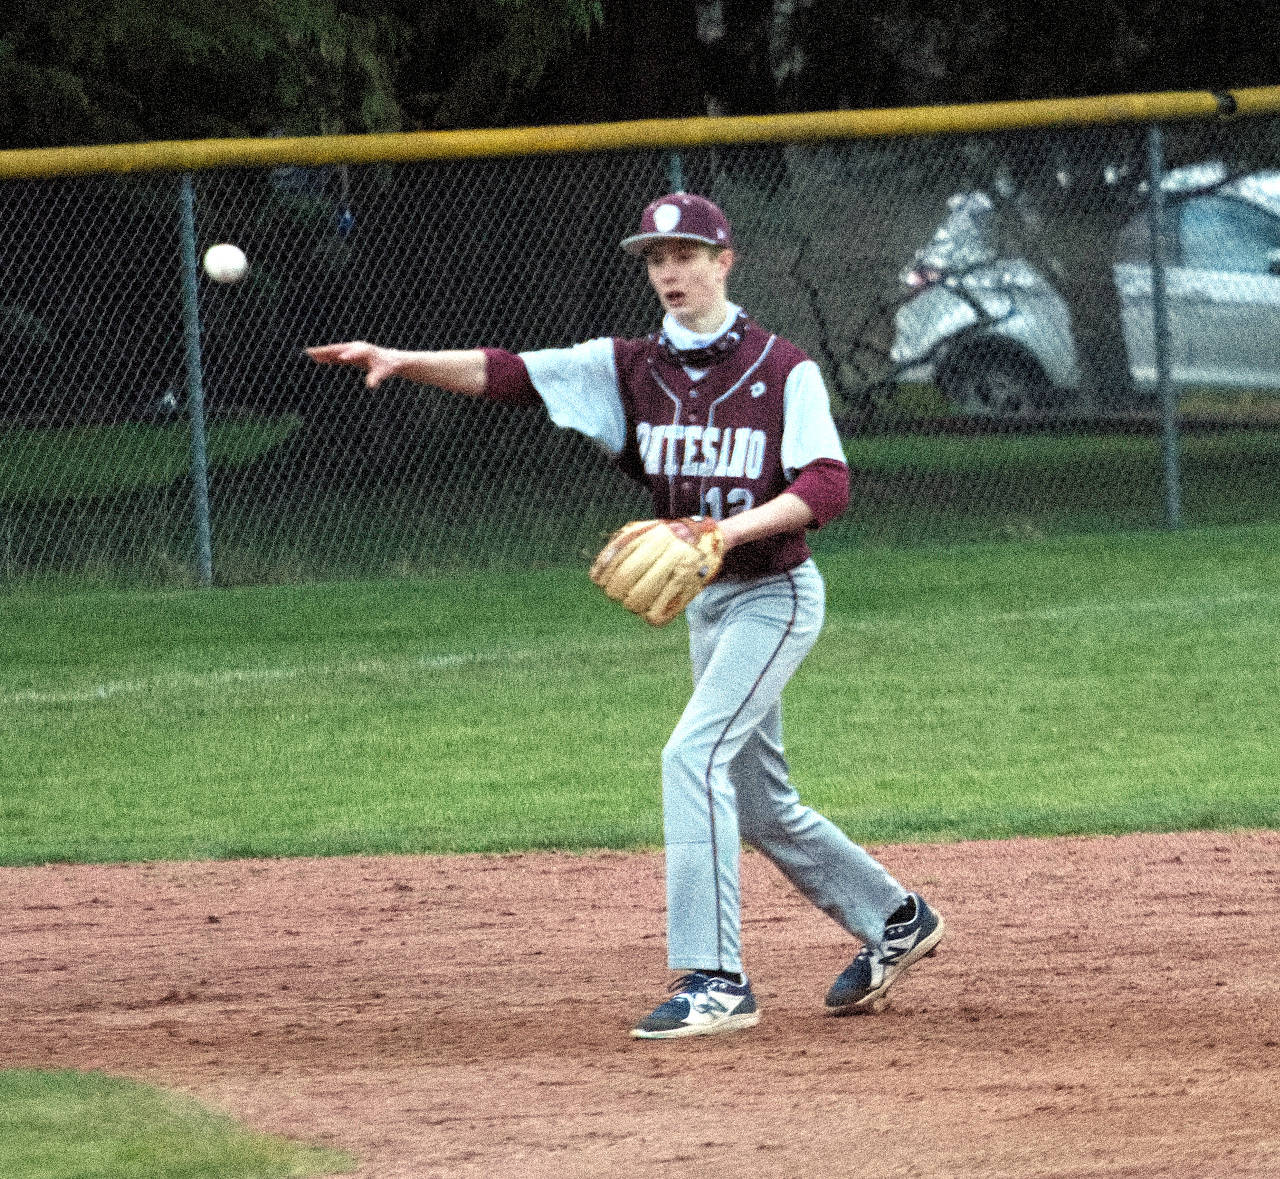 Montesano shortstop Bode Poler went 3-for-3 and hit a game-winning, walk-off double in the bottom of the seventh inning to give Monte a 5-4 victory over the River Ridge Hawks on Friday in Montesano. (Ryan Sparks | The Daily World)